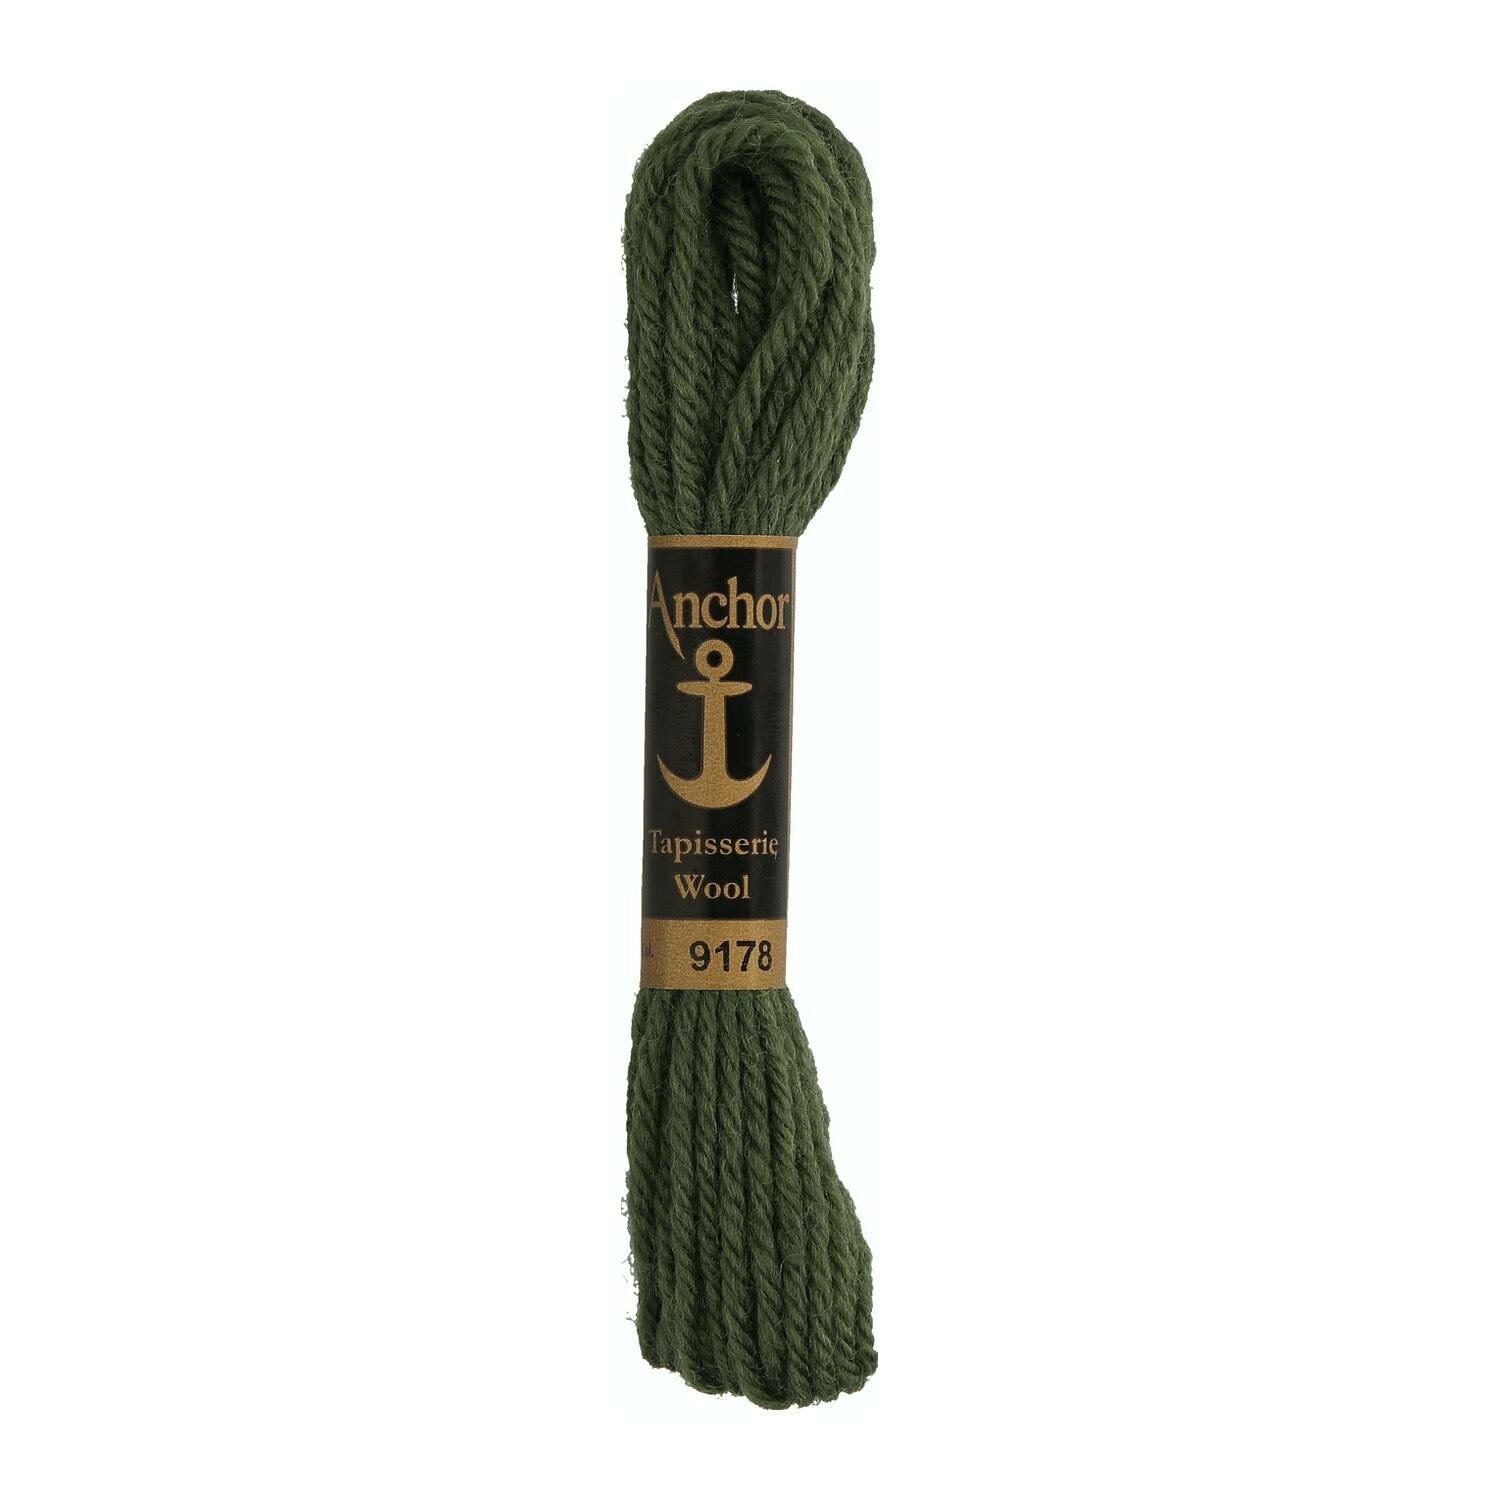 Anchor Tapisserie Wool # 09178